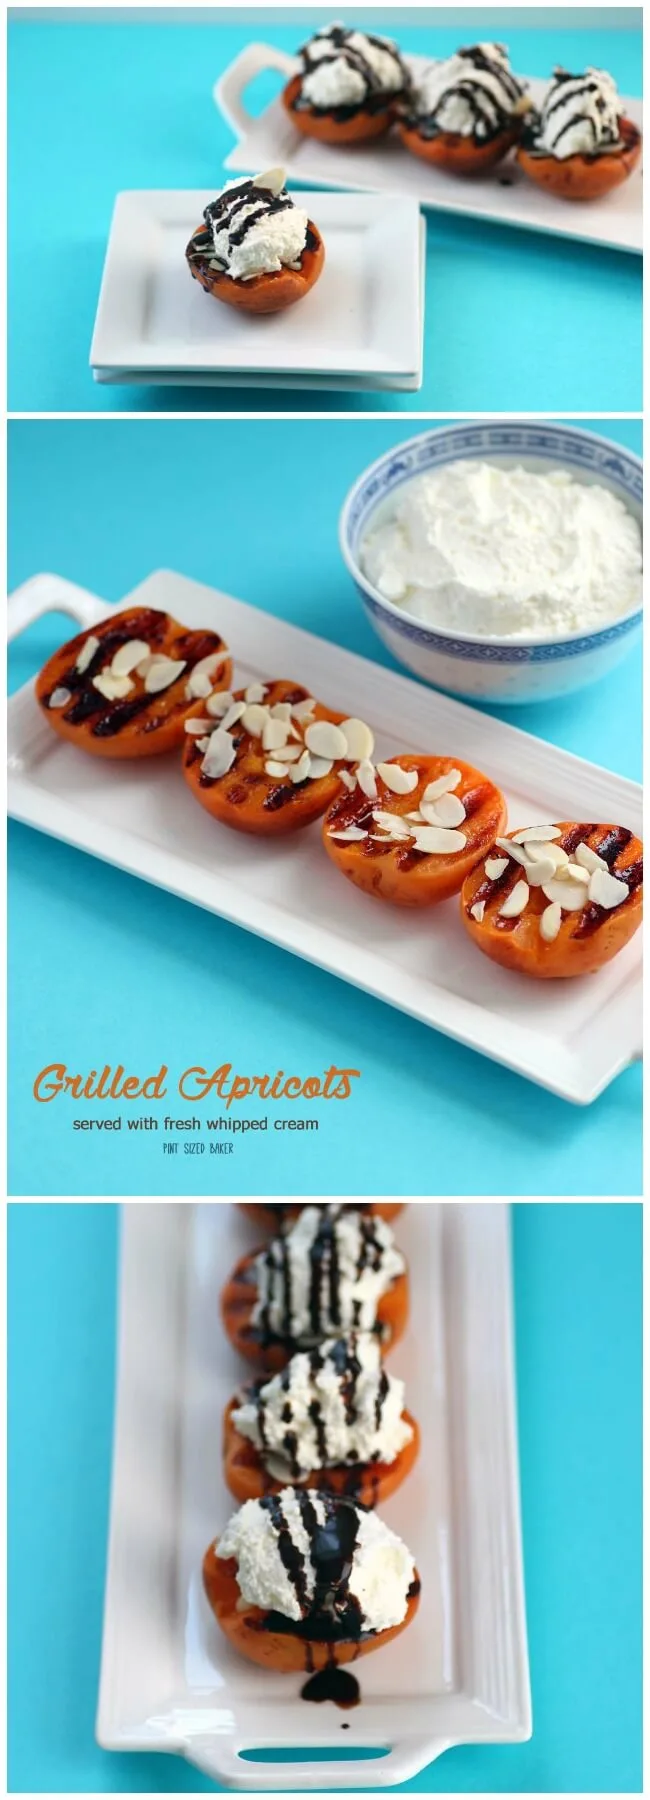 Don't let those coals go to waste after grilling dinner. Make grilled apricots for dessert and top them with fresh whipped cream and almond slivers.